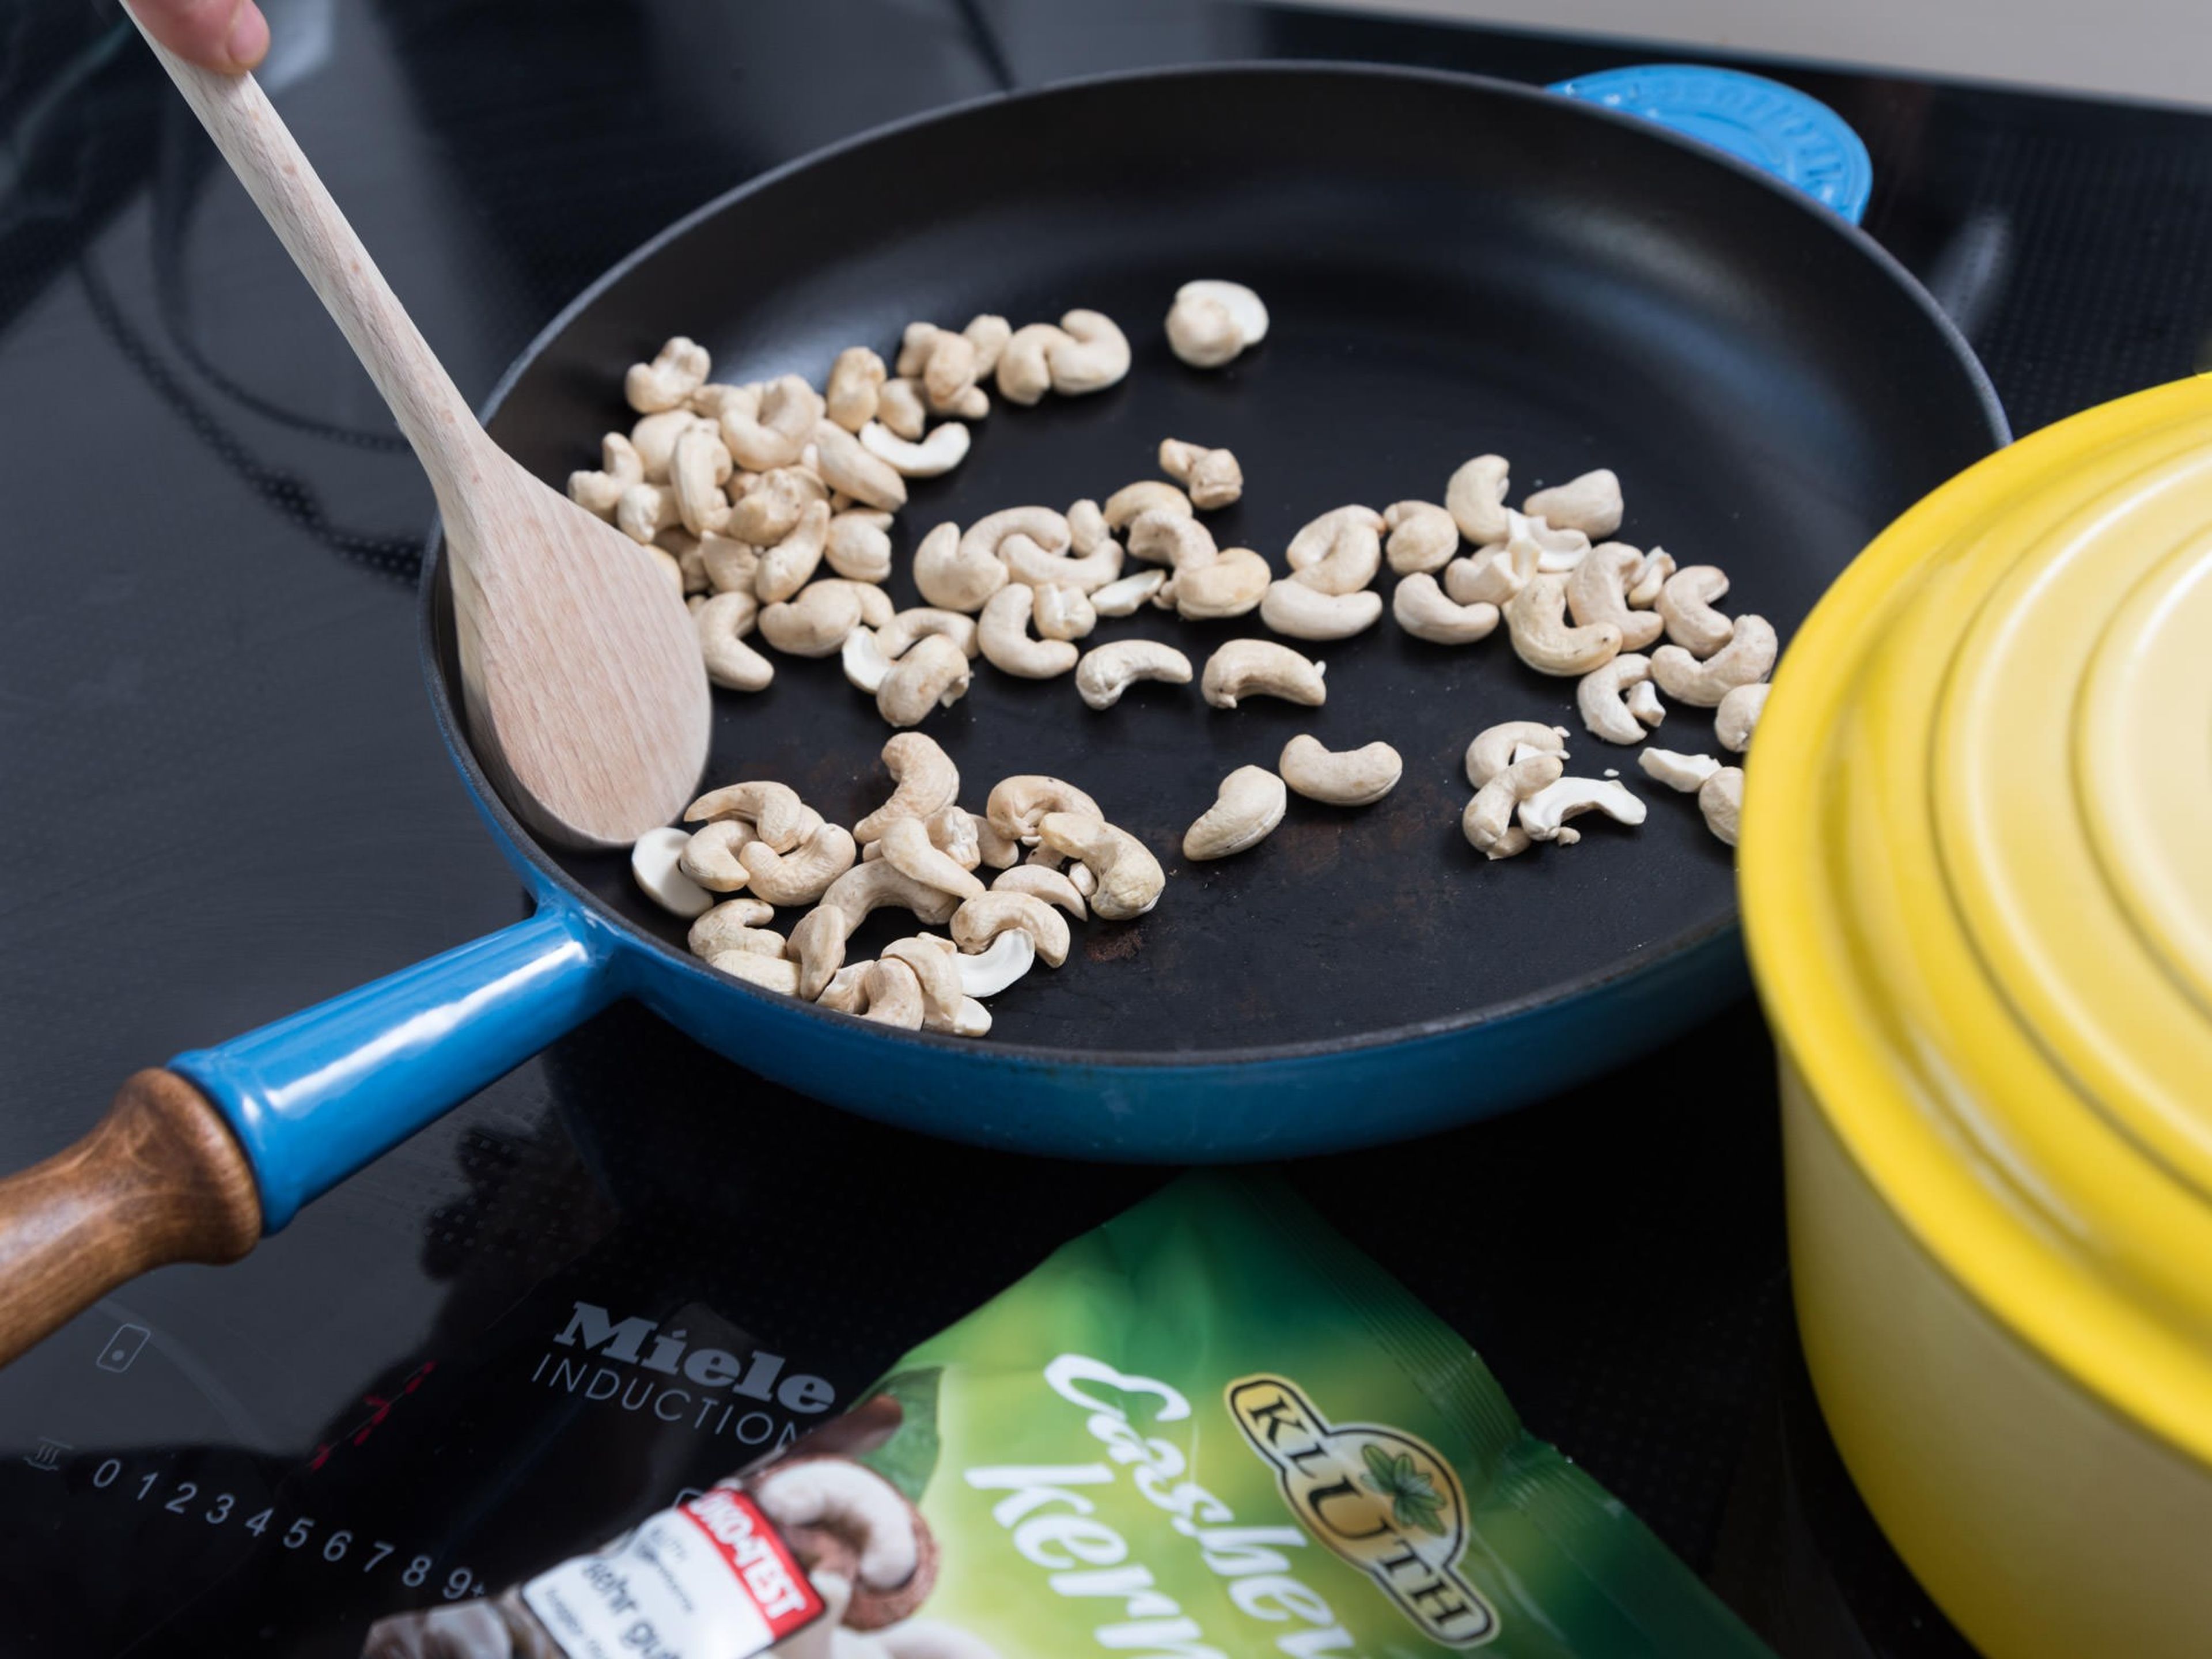 Heat a frying pan over medium heat. Transfer cashews into frying pan and toast for approx. 2 – 3 min., or until browned. Remove from pan and set aside.